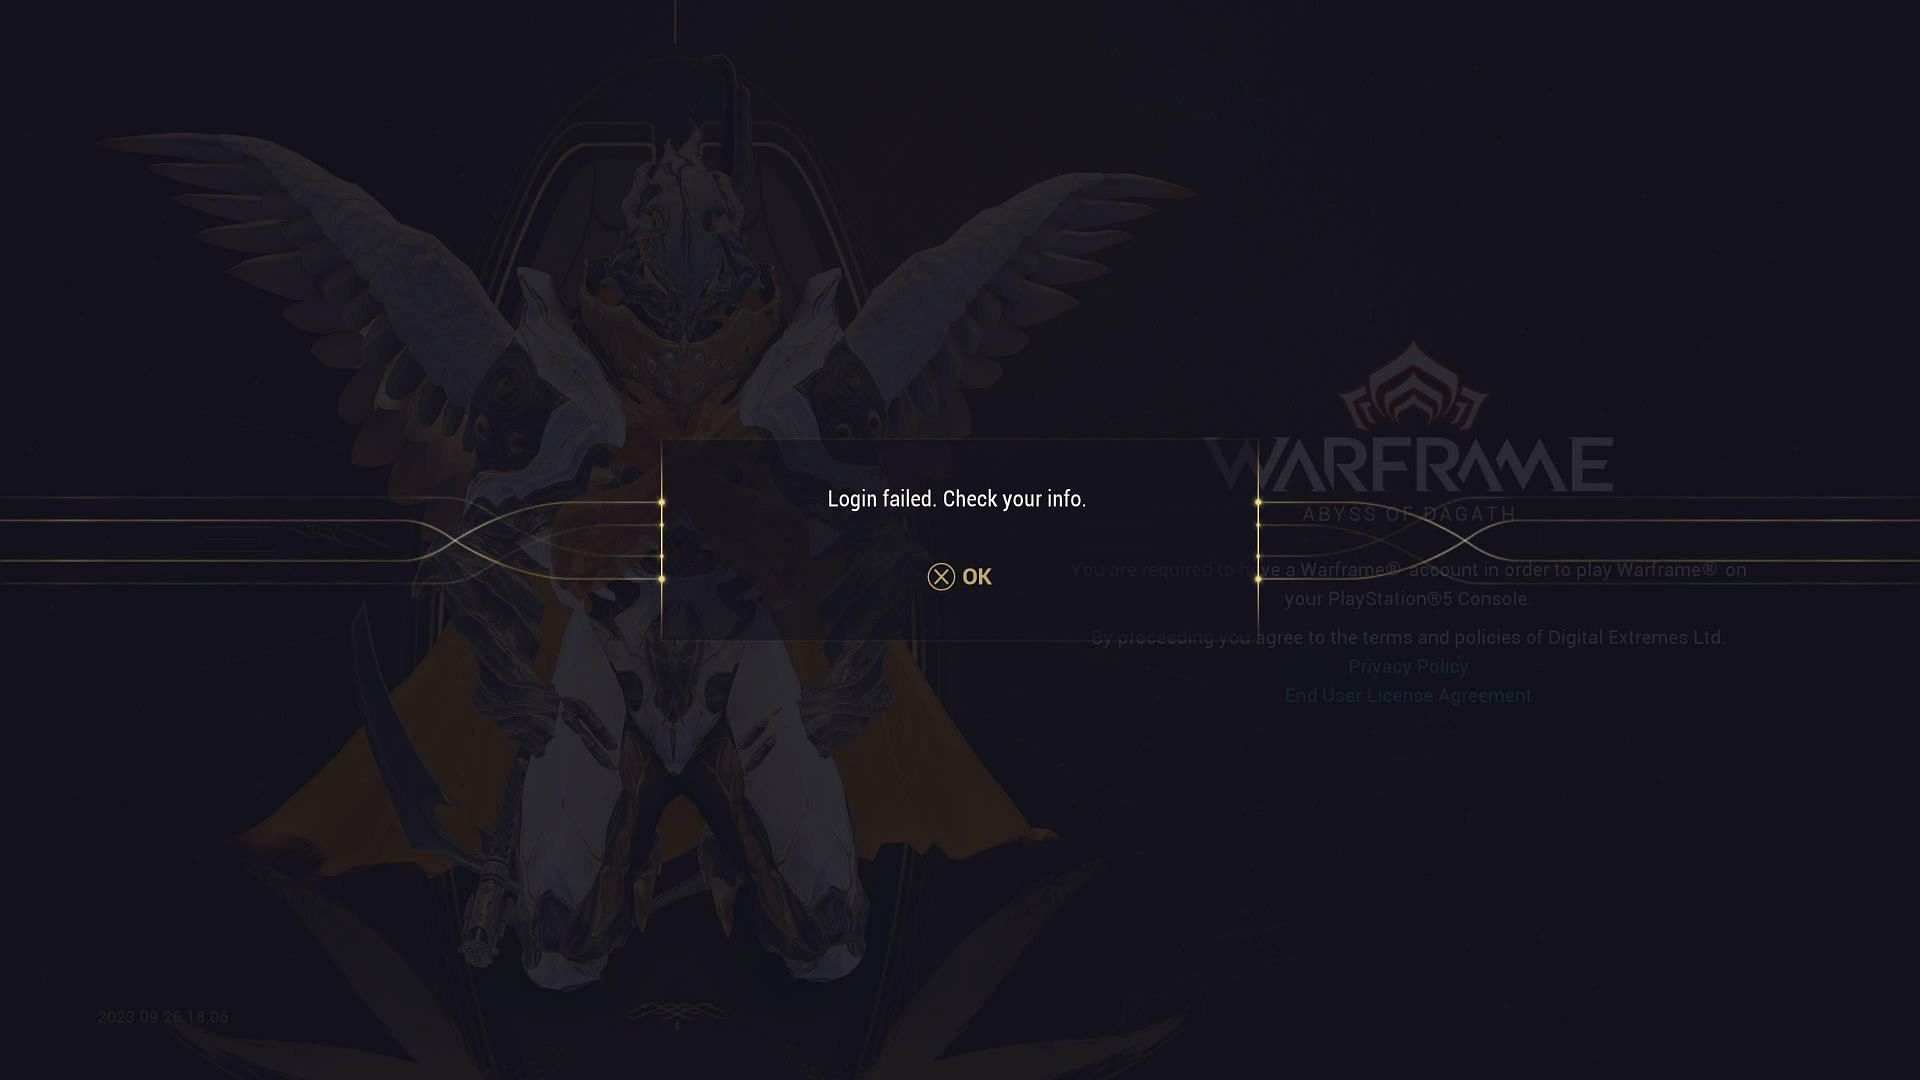 The &#039;Login failed, check your info&#039; error may indicate temporary server downtime (Image via Digital Extremes)